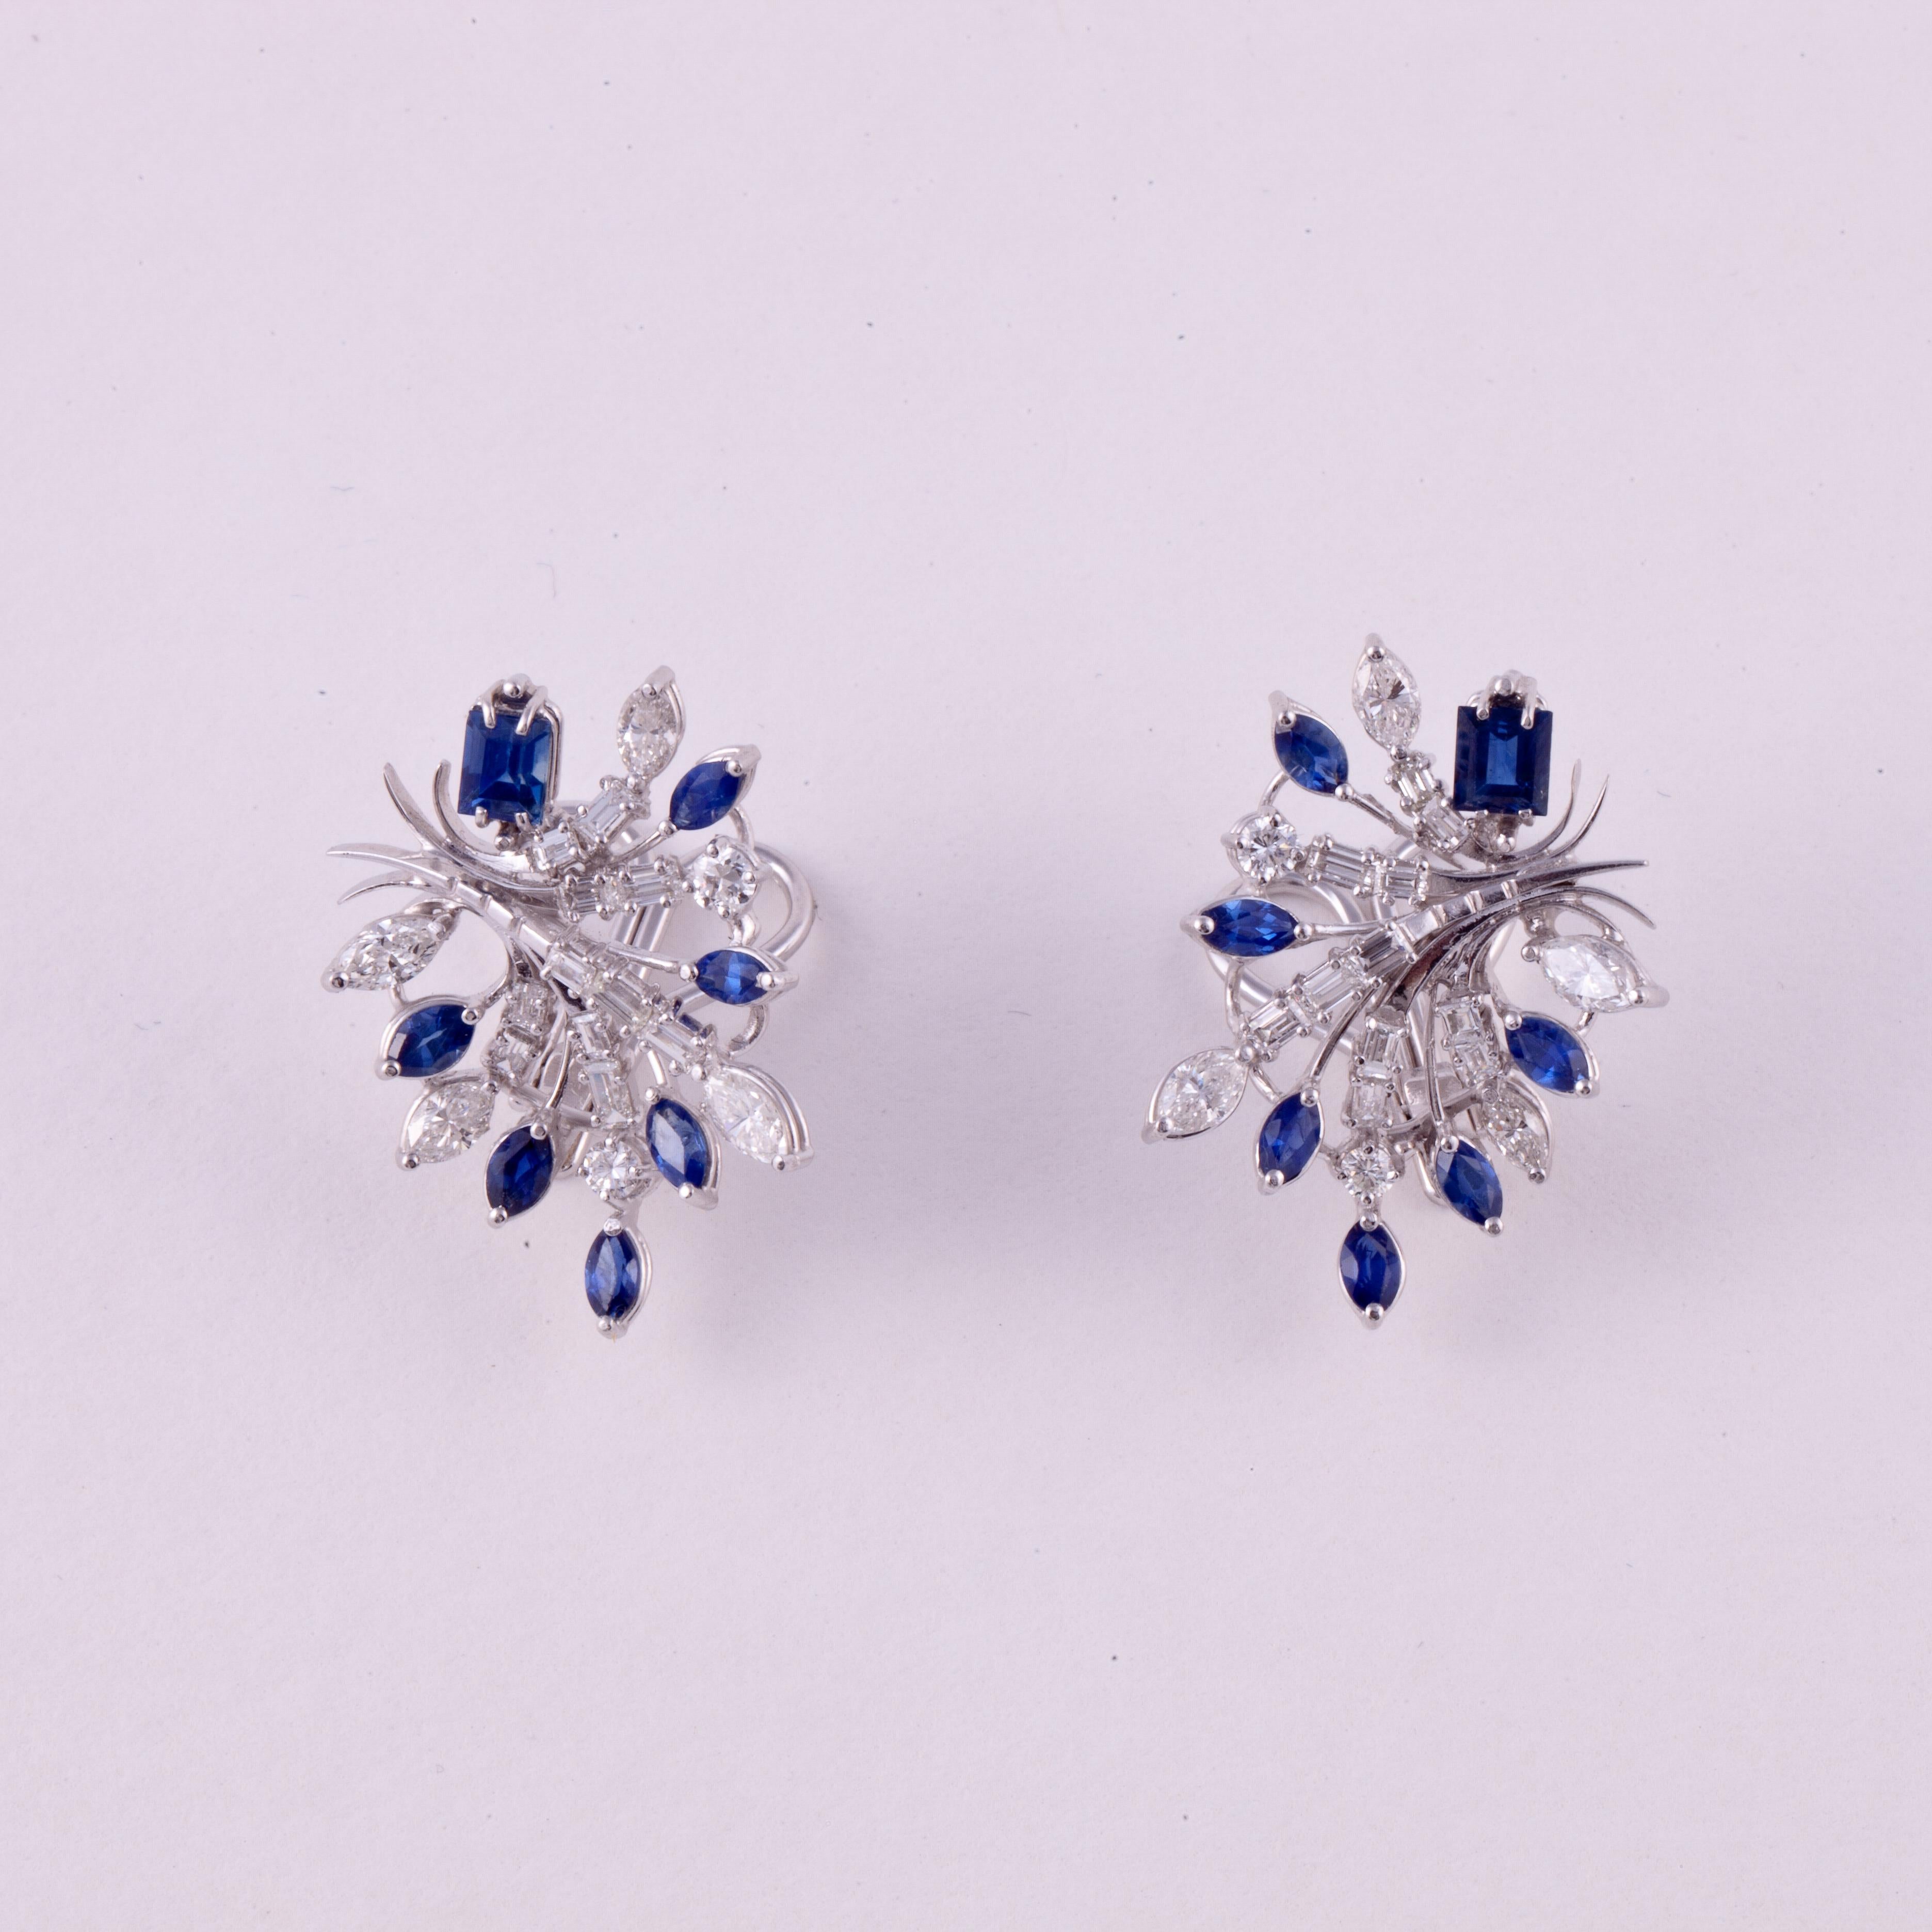 Platinum cluster earrings set with different shapes of diamonds and sapphires.  There are thirty-six (36) diamonds totaling 2.50 carats; F-H color and VS1-VS2 clarity.  There are also fourteen (14) sapphires which total 3 carats.  Measure 1 1/8